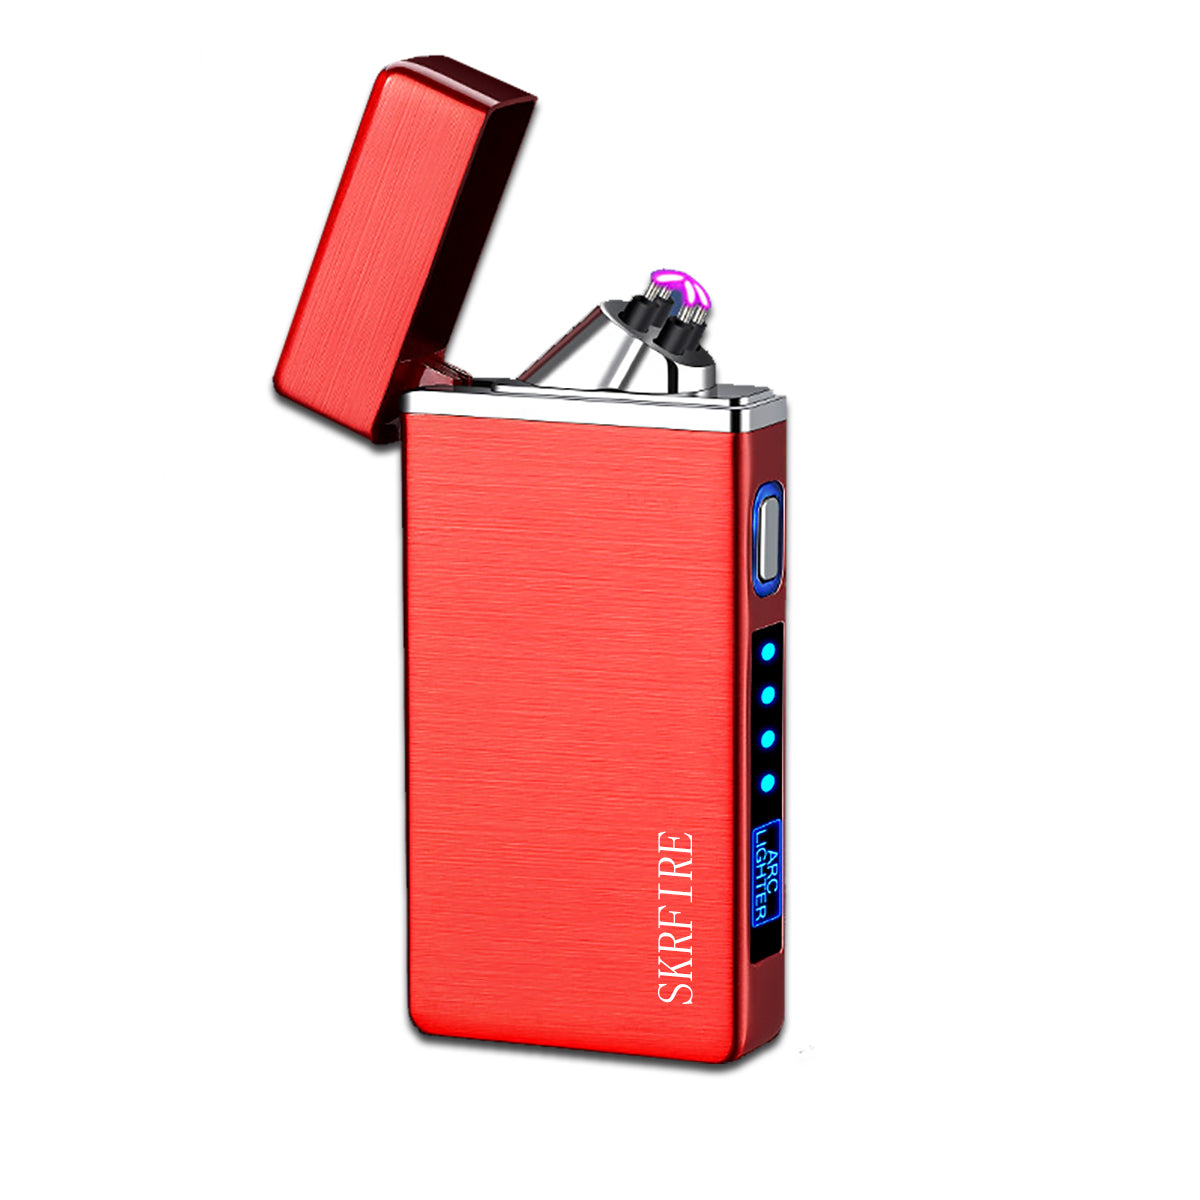 SKRFIRE PVD-Plating Dual Arc Electric Lighter PVD-Plating  with Rhythmic Flashing Battery Indicator